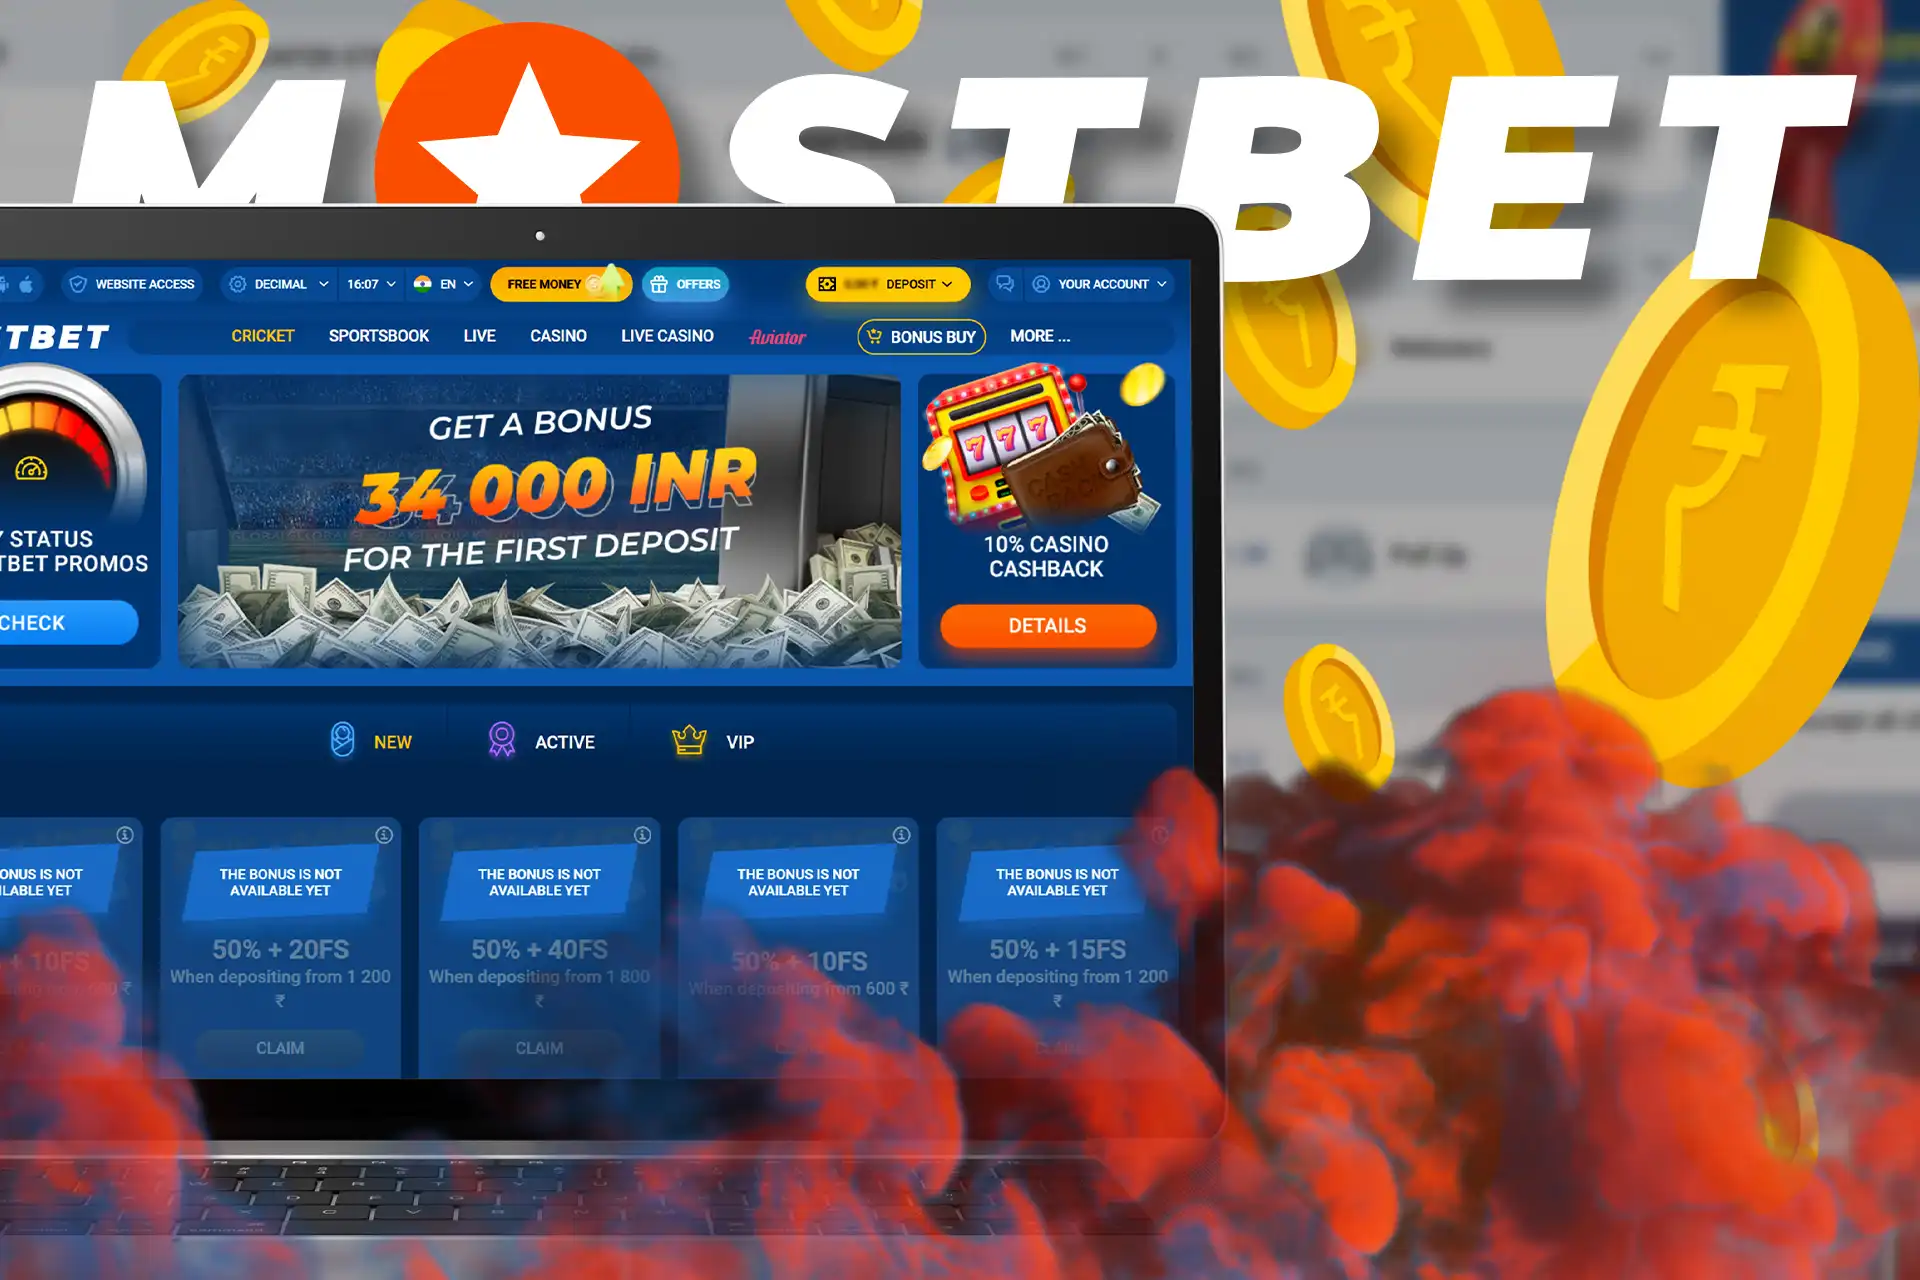 With Mostbet, get a special bonus for cashback on bets.